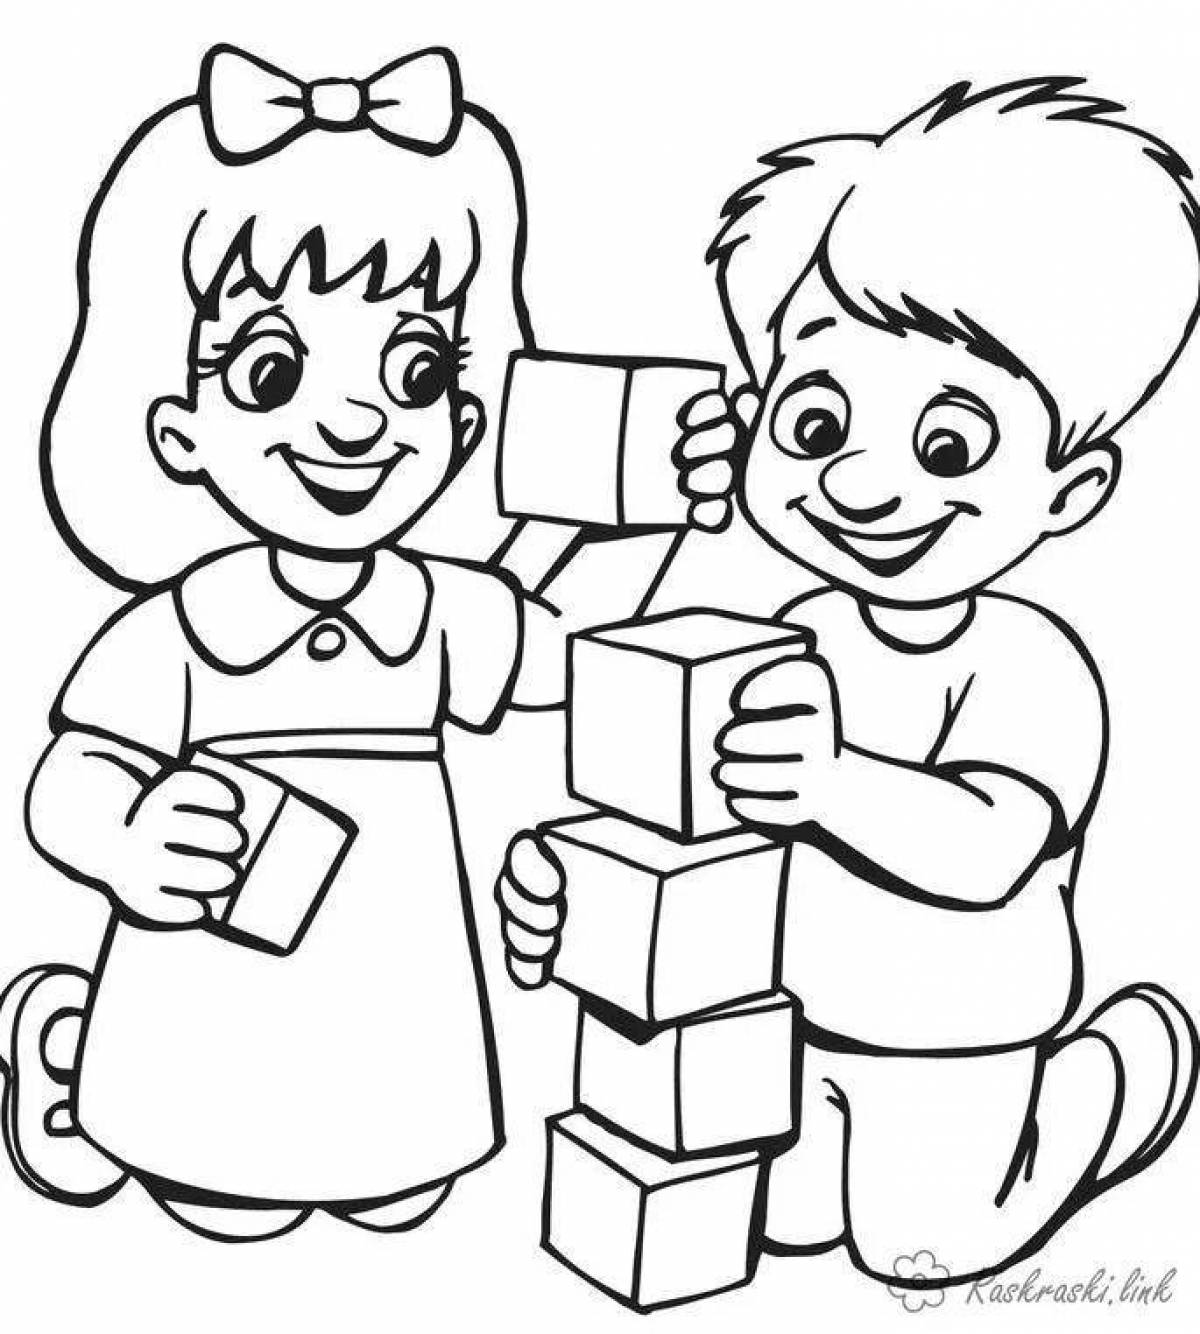 Coloured children's coloring pages